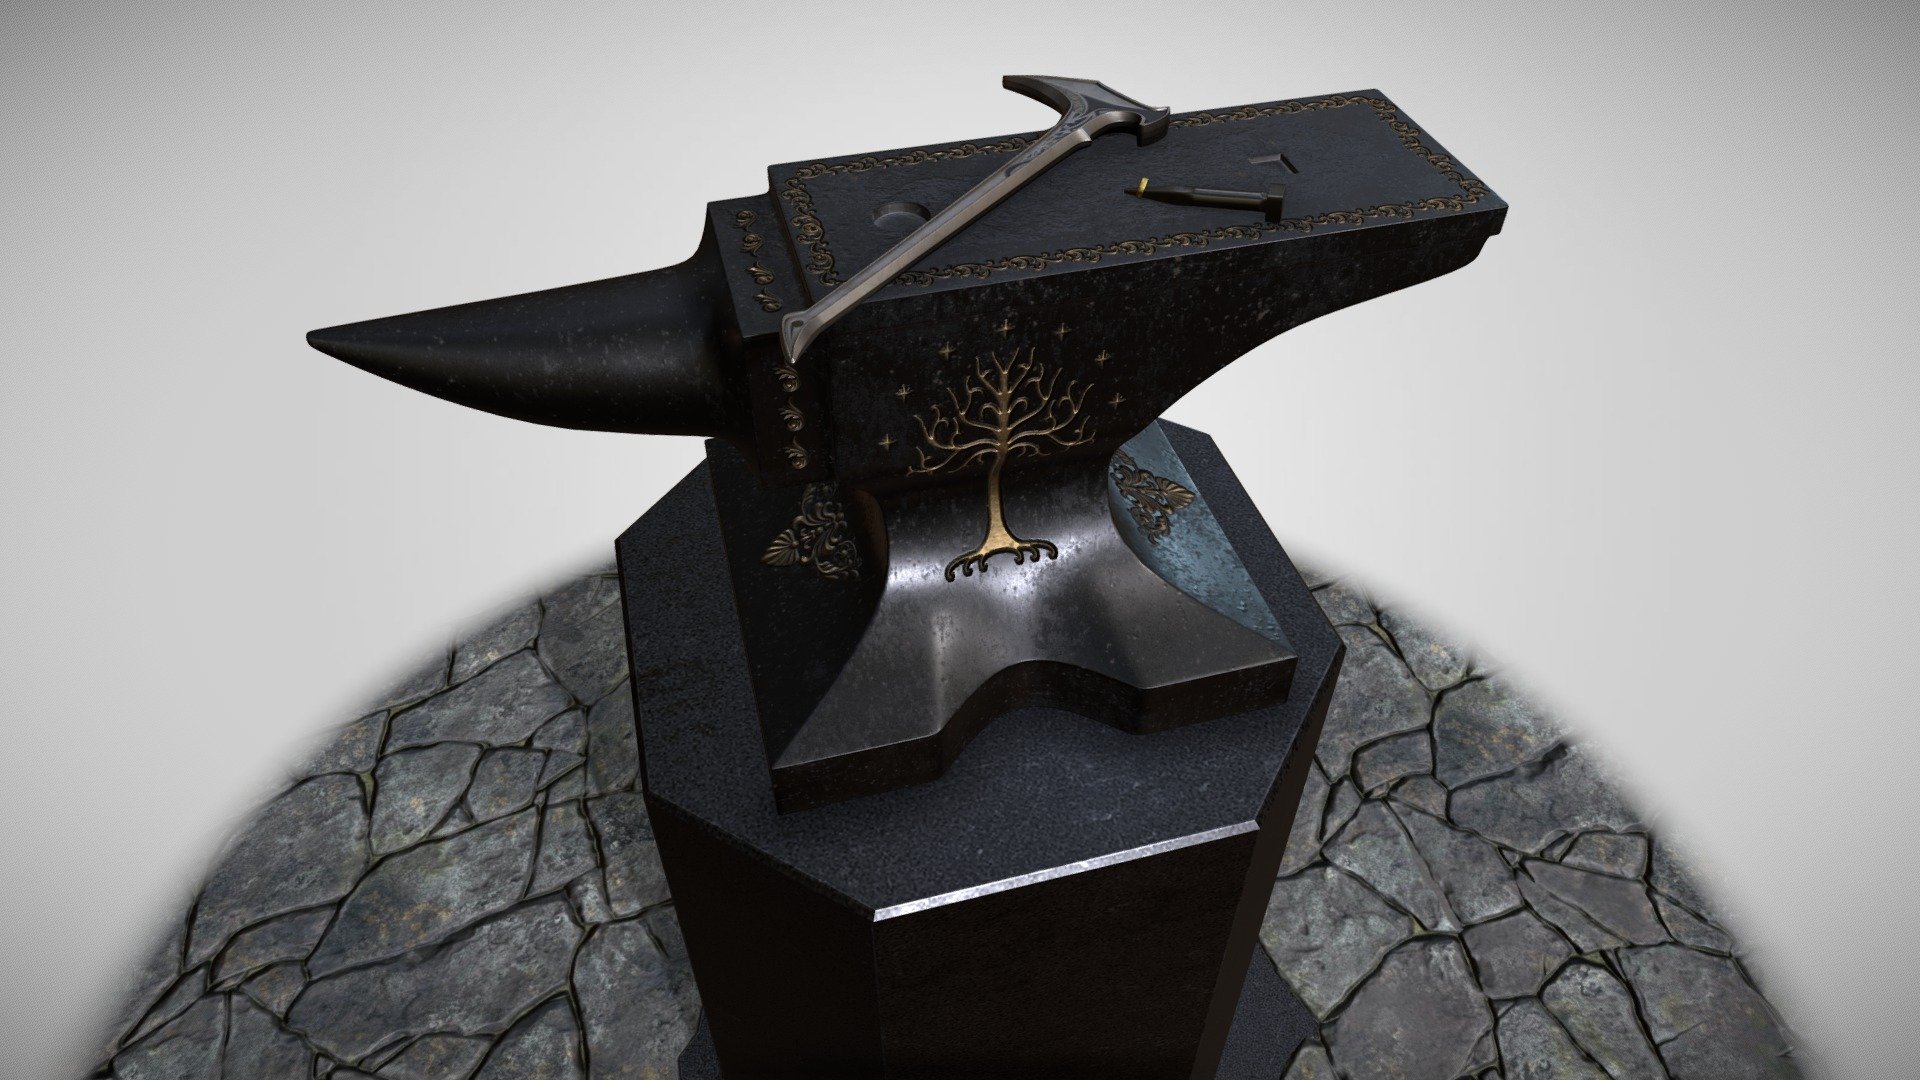 In preparation for the Upcomming Shadow of Morodor Game i wanted to Model Celebrimbor's Hammer.  Well what good is a Hammer without an Anvil and the one and only Ring of Power? - Shadow of Morodor Celebrimbor's Forge - Buy Royalty Free 3D model by dark-minaz 3d model